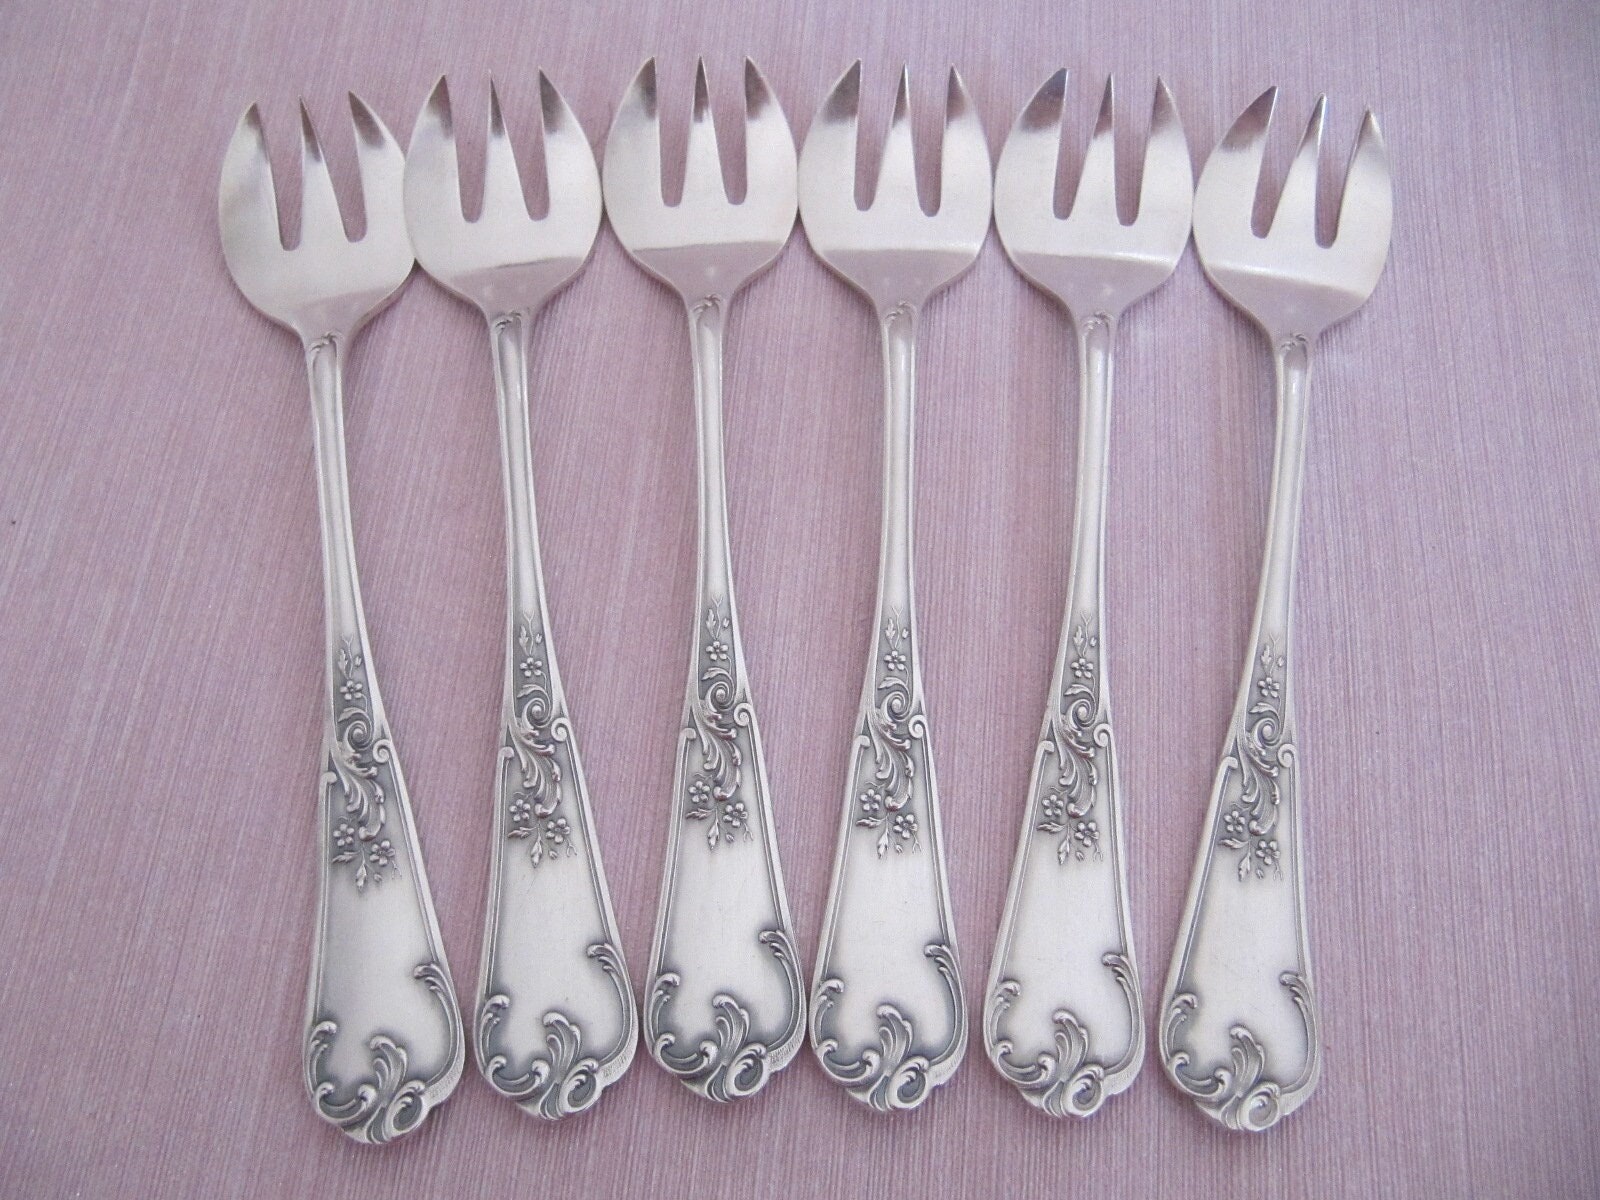 Beautiful French Oyster Cocktail Seafood Coldcuts Forks Set Of 6 Silverplate, Floral Design Cutlery Made in France Circa 1950's, Mid-Century